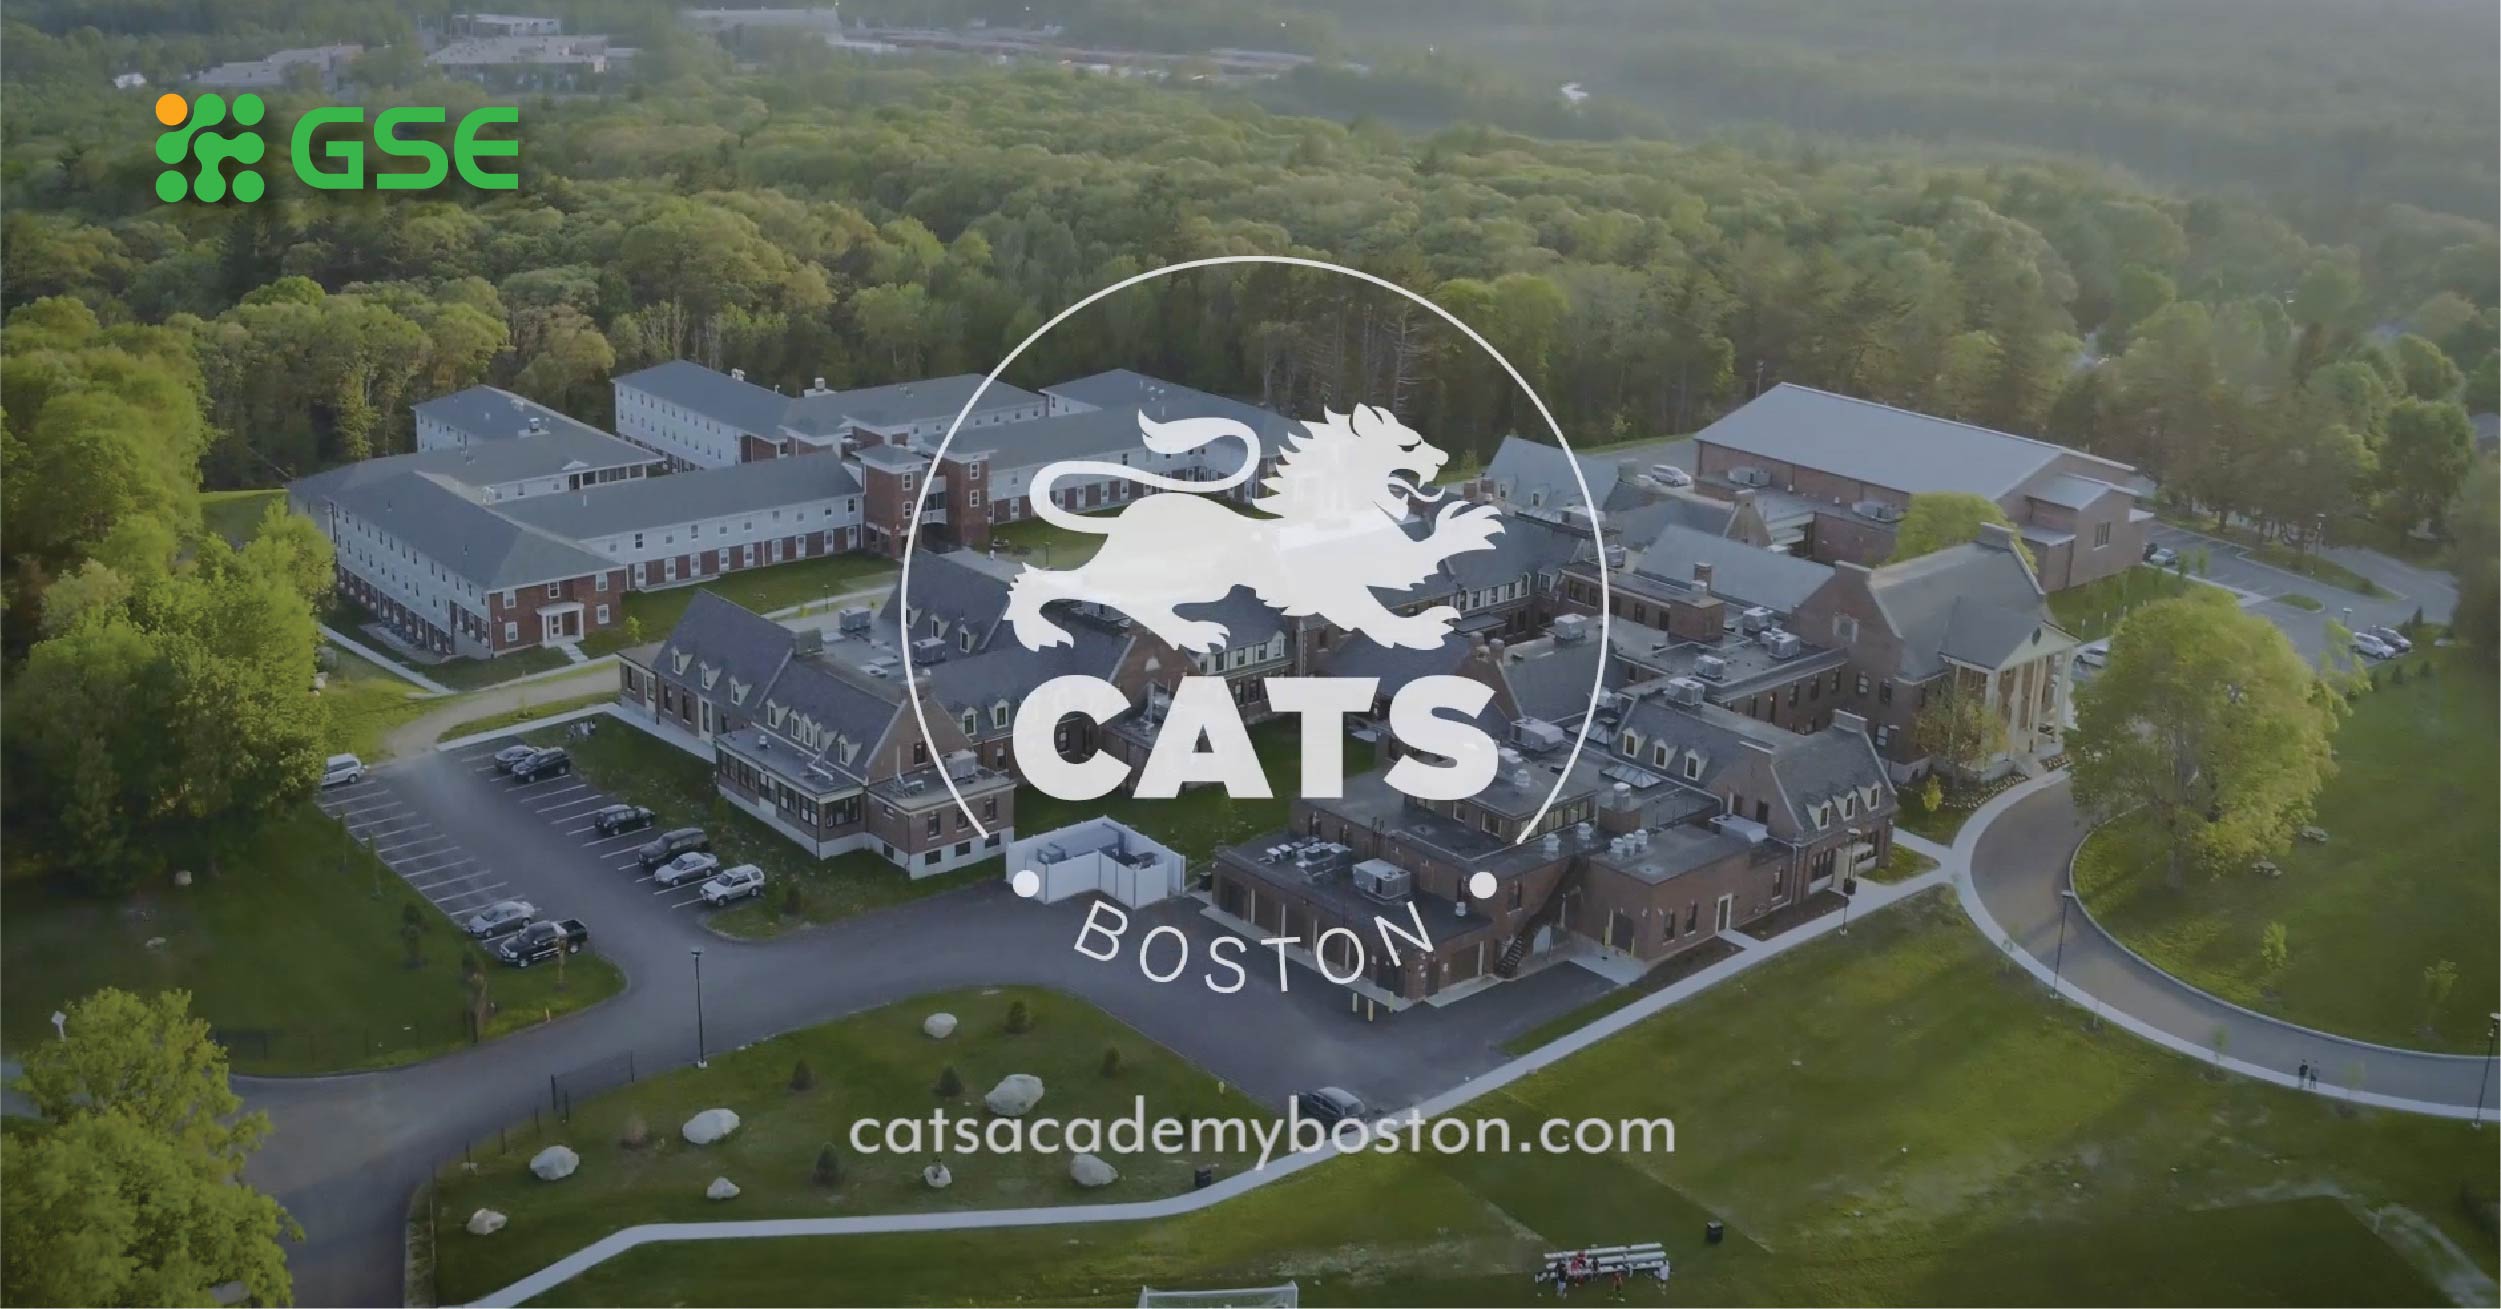 CATS Academy Boston khai giảng lớp học face-to-face kỳ tháng 9/2020